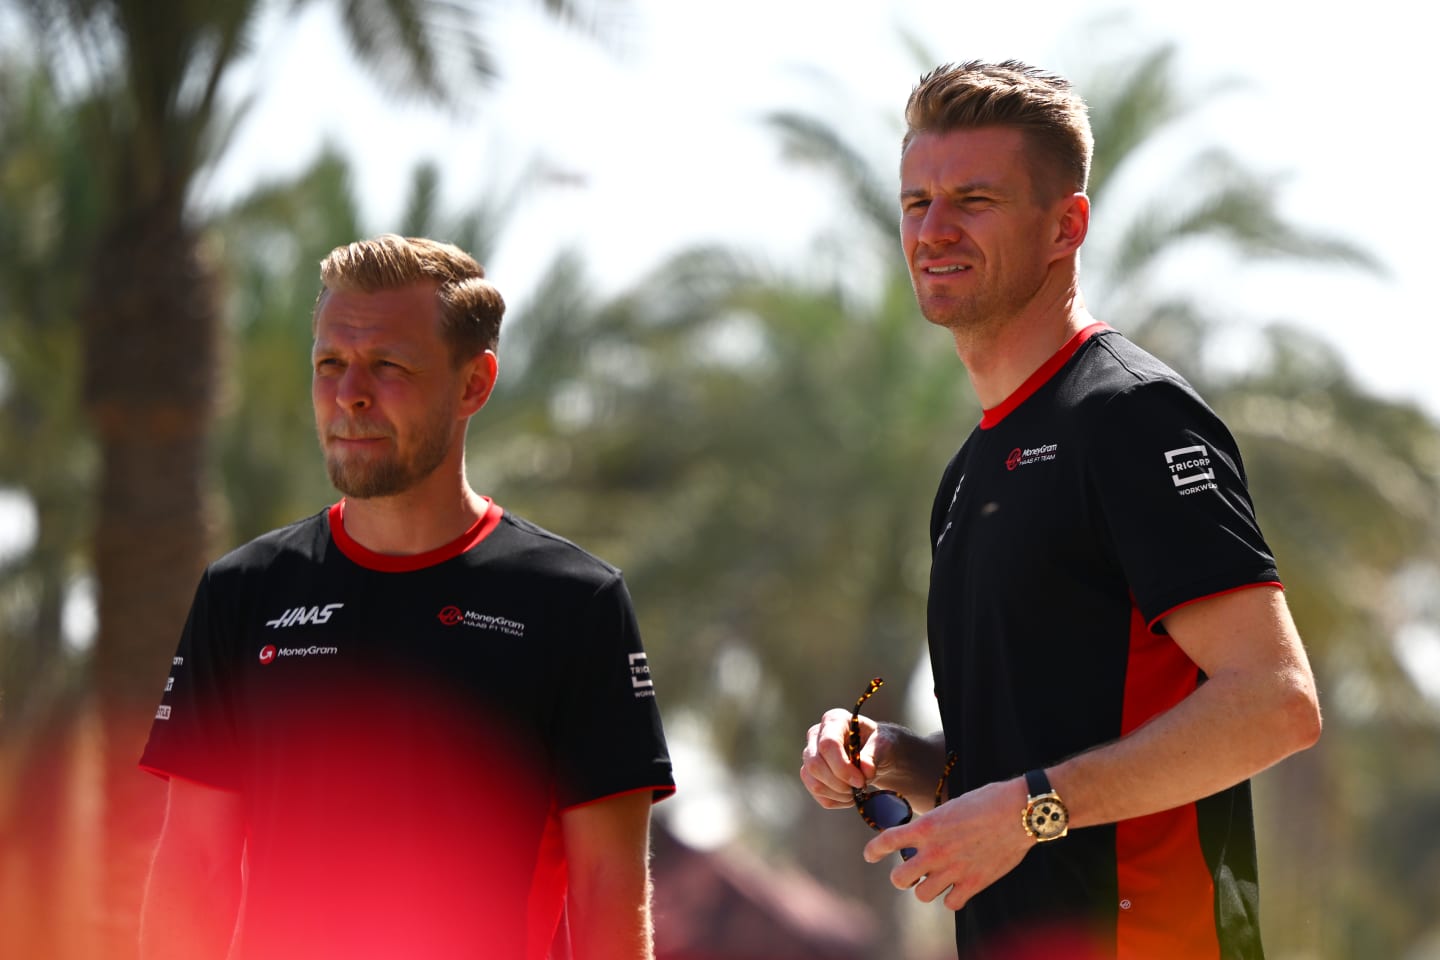 BAHRAIN, BAHRAIN - MARCH 02: Kevin Magnussen of Denmark and Haas F1 and Nico Hulkenberg of Germany